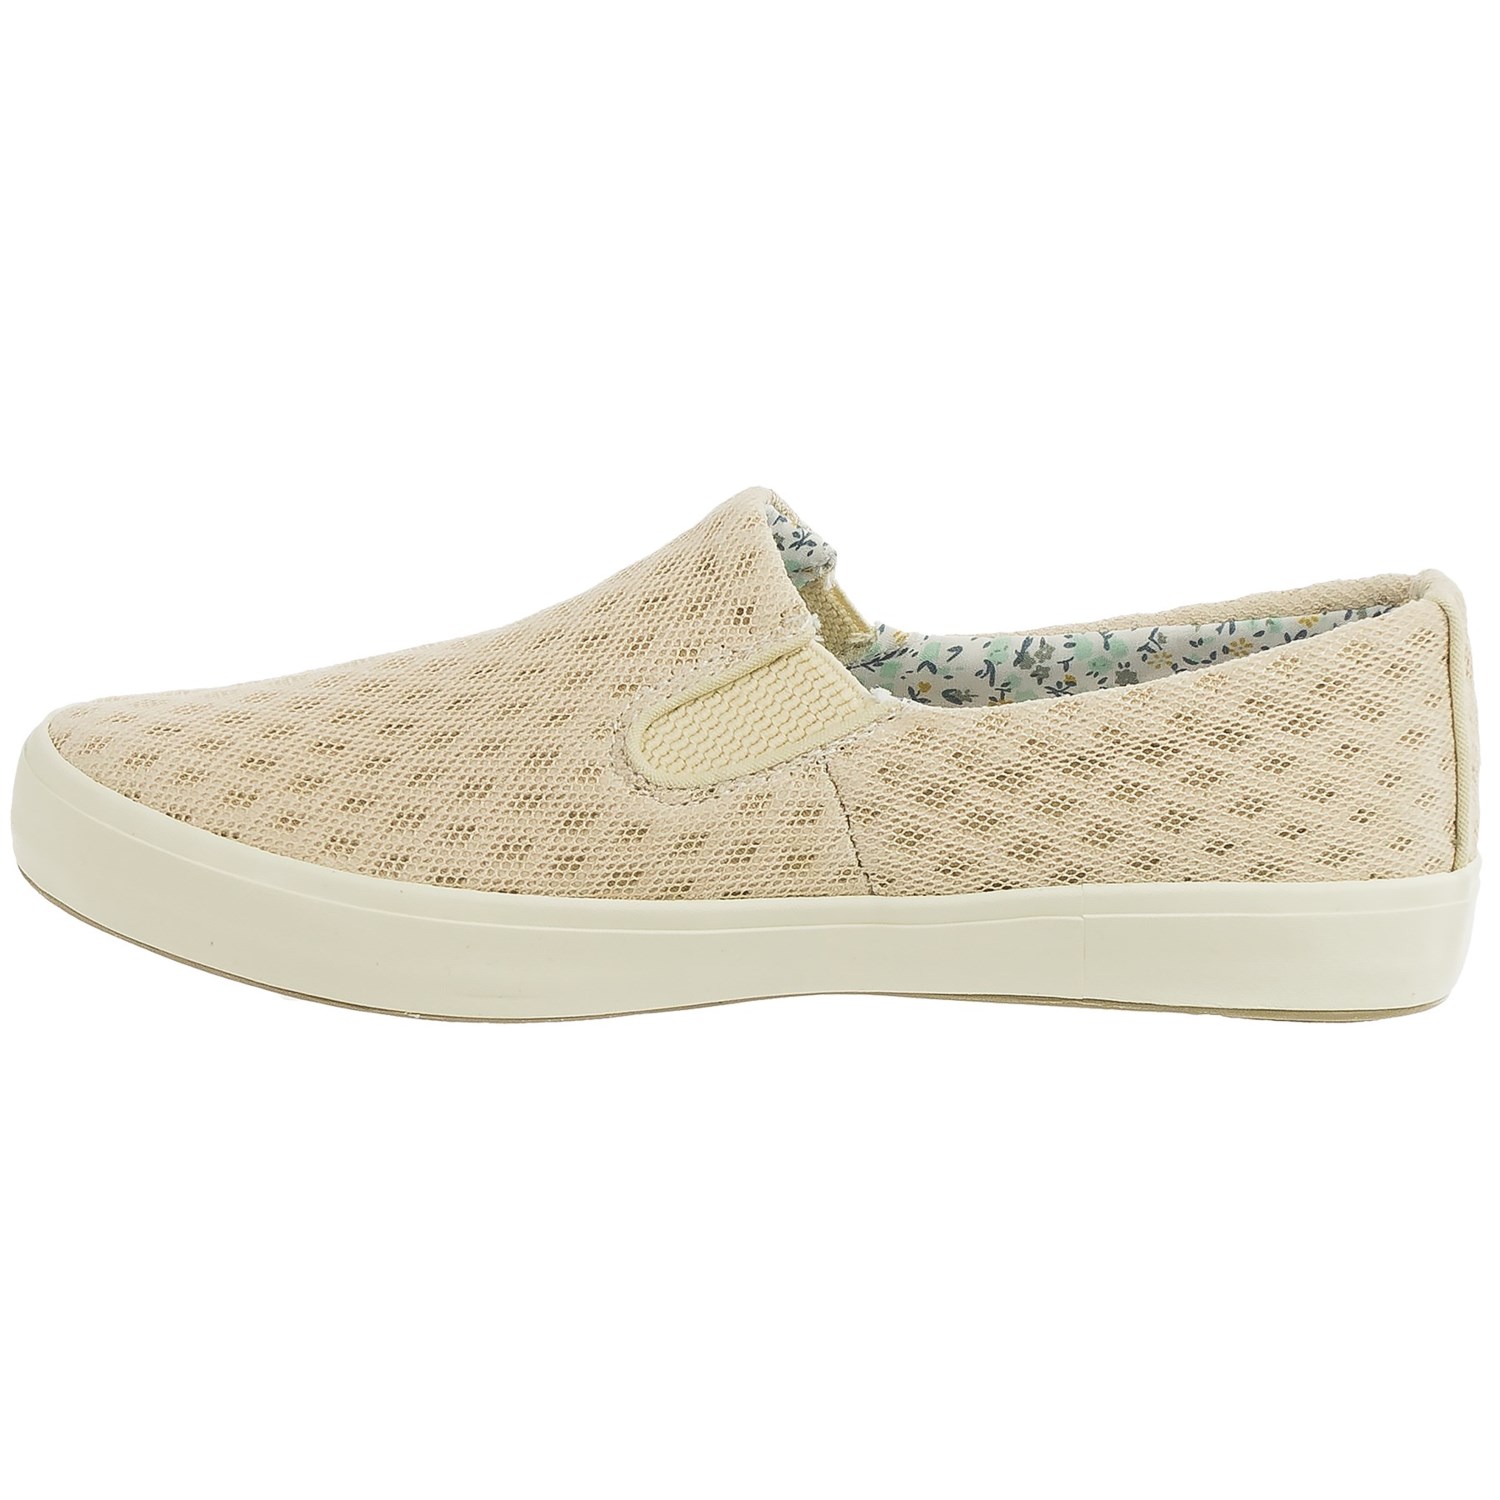 Eastland Breezy Shoes (For Women) - Save 50%